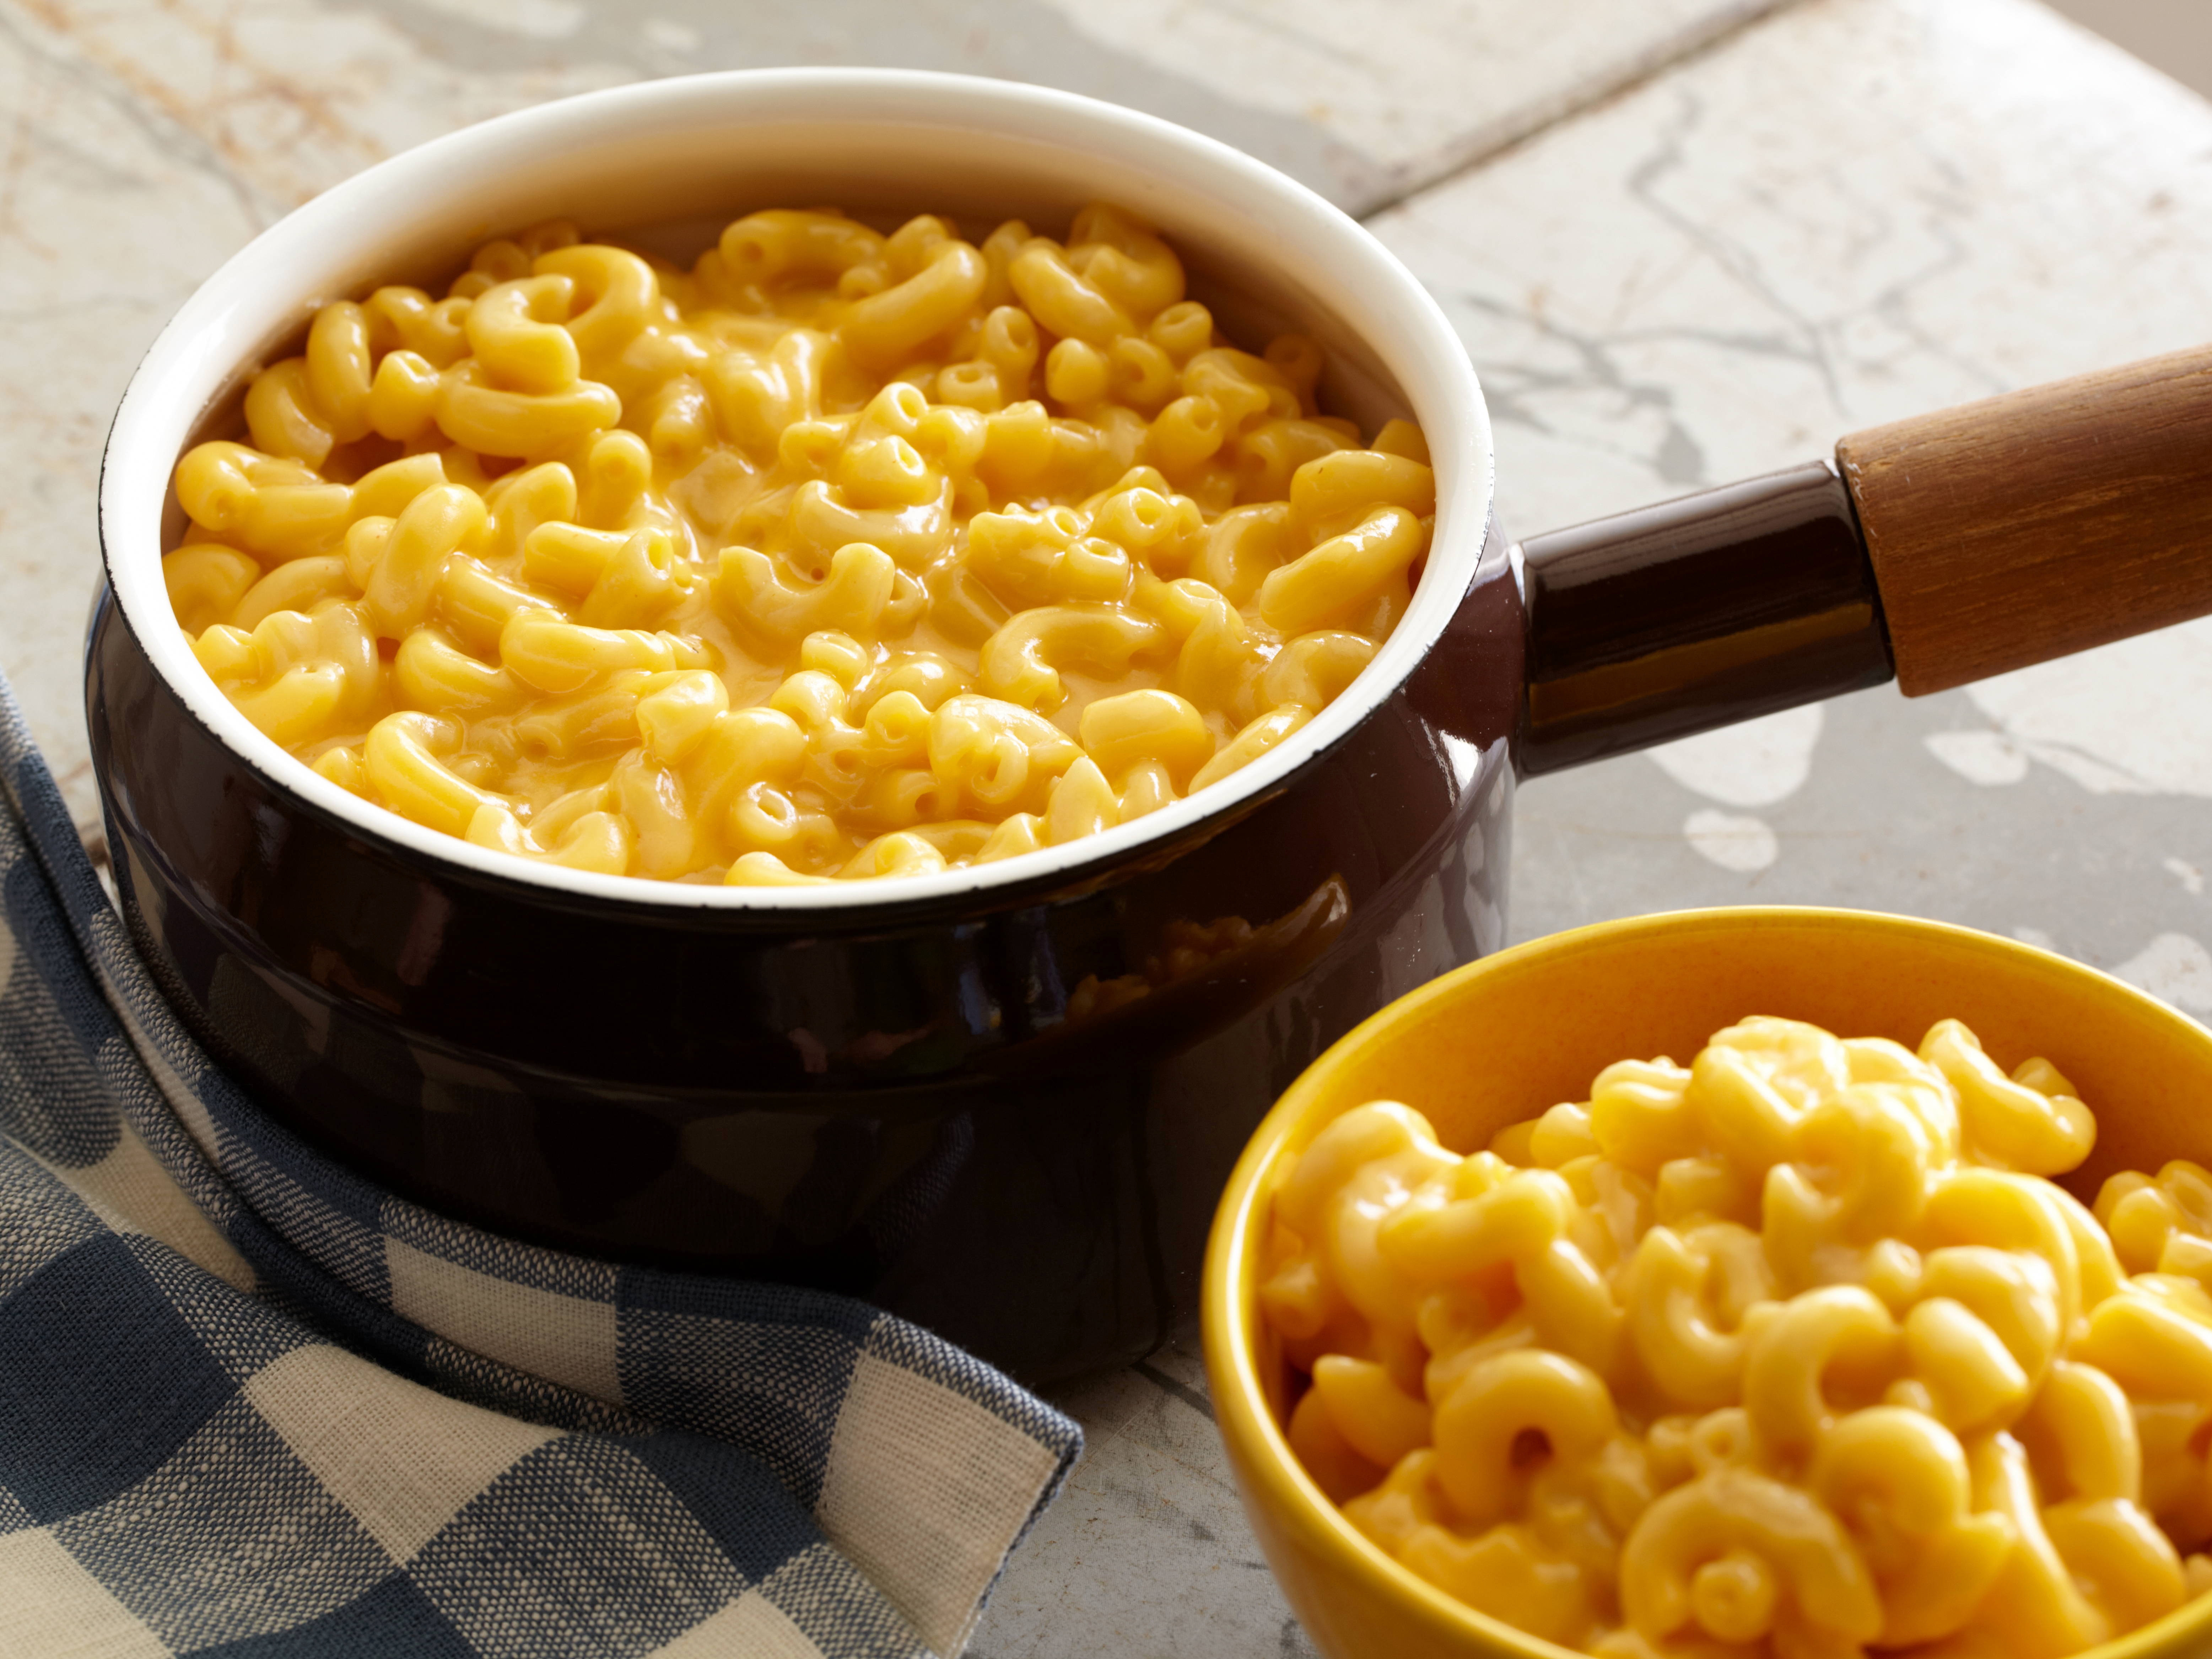 pioneer woman mac and cheese using evaporated milk